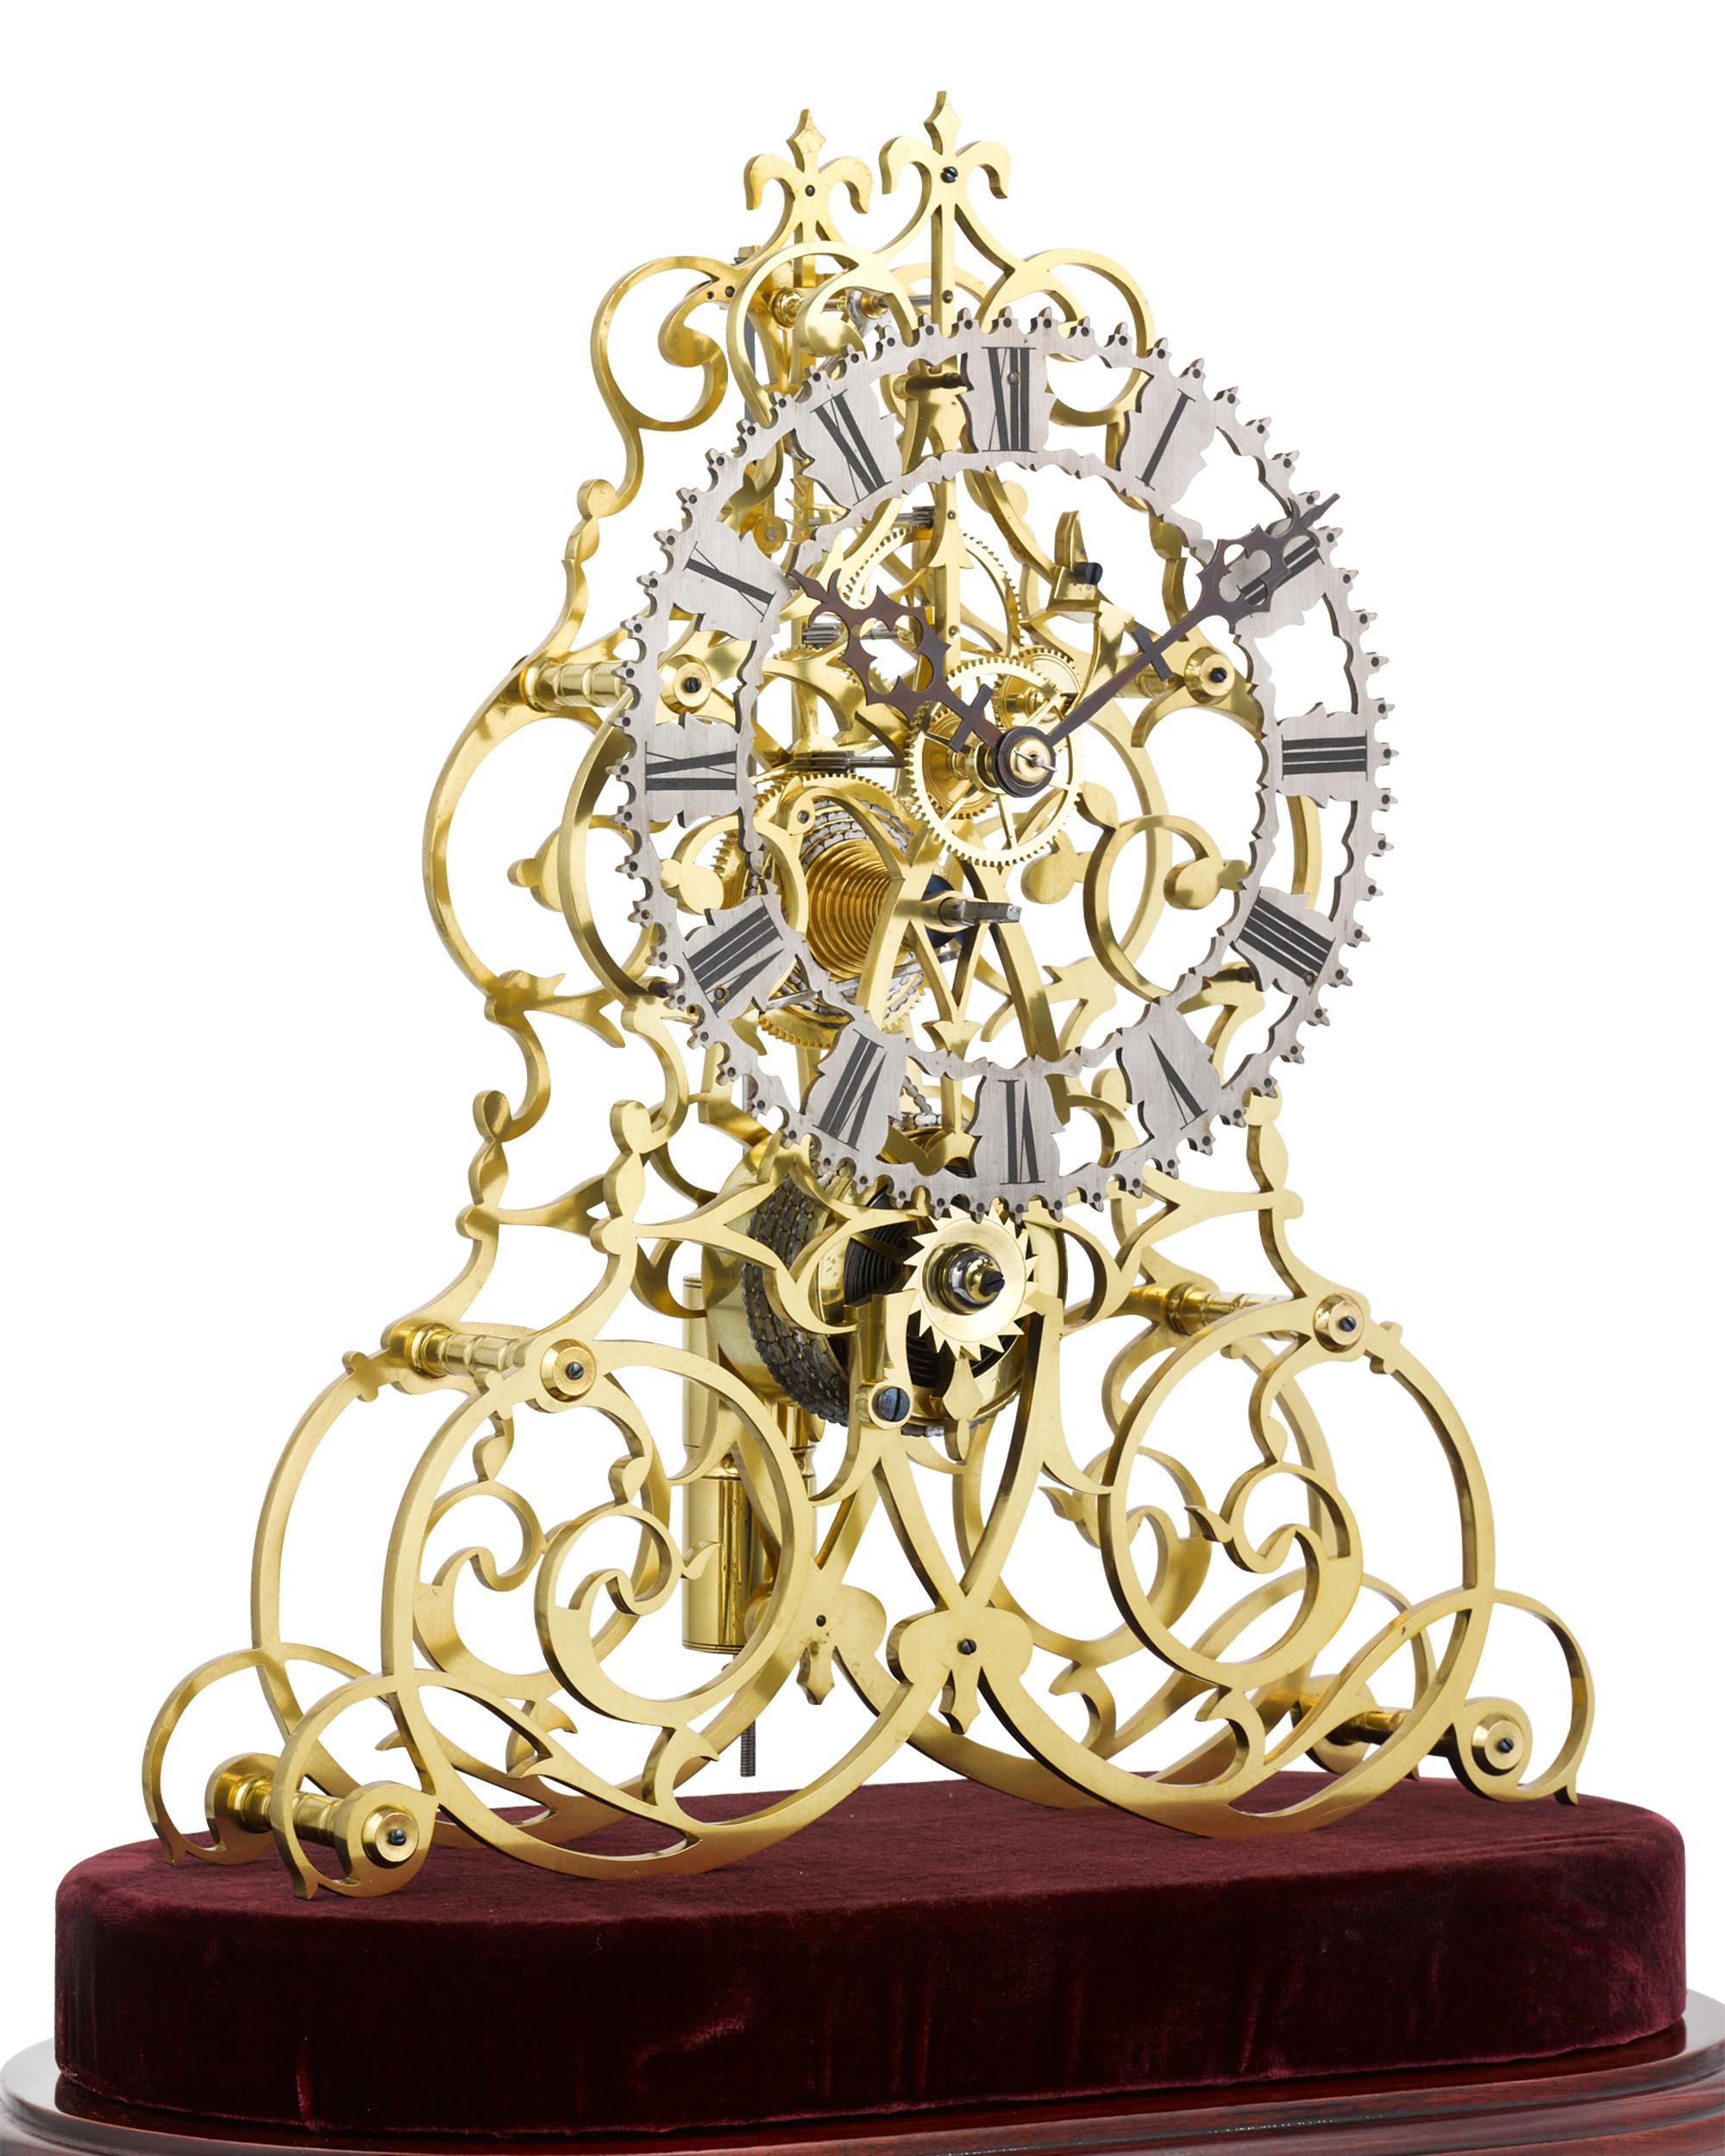 This incredible brass arabesque skeleton clock is an outstanding example by the preeminent English firm of William Frederick Evans of Handsworth, Birmingham. This horologic masterpiece is in complete, working condition, powered by an 8-day movement.